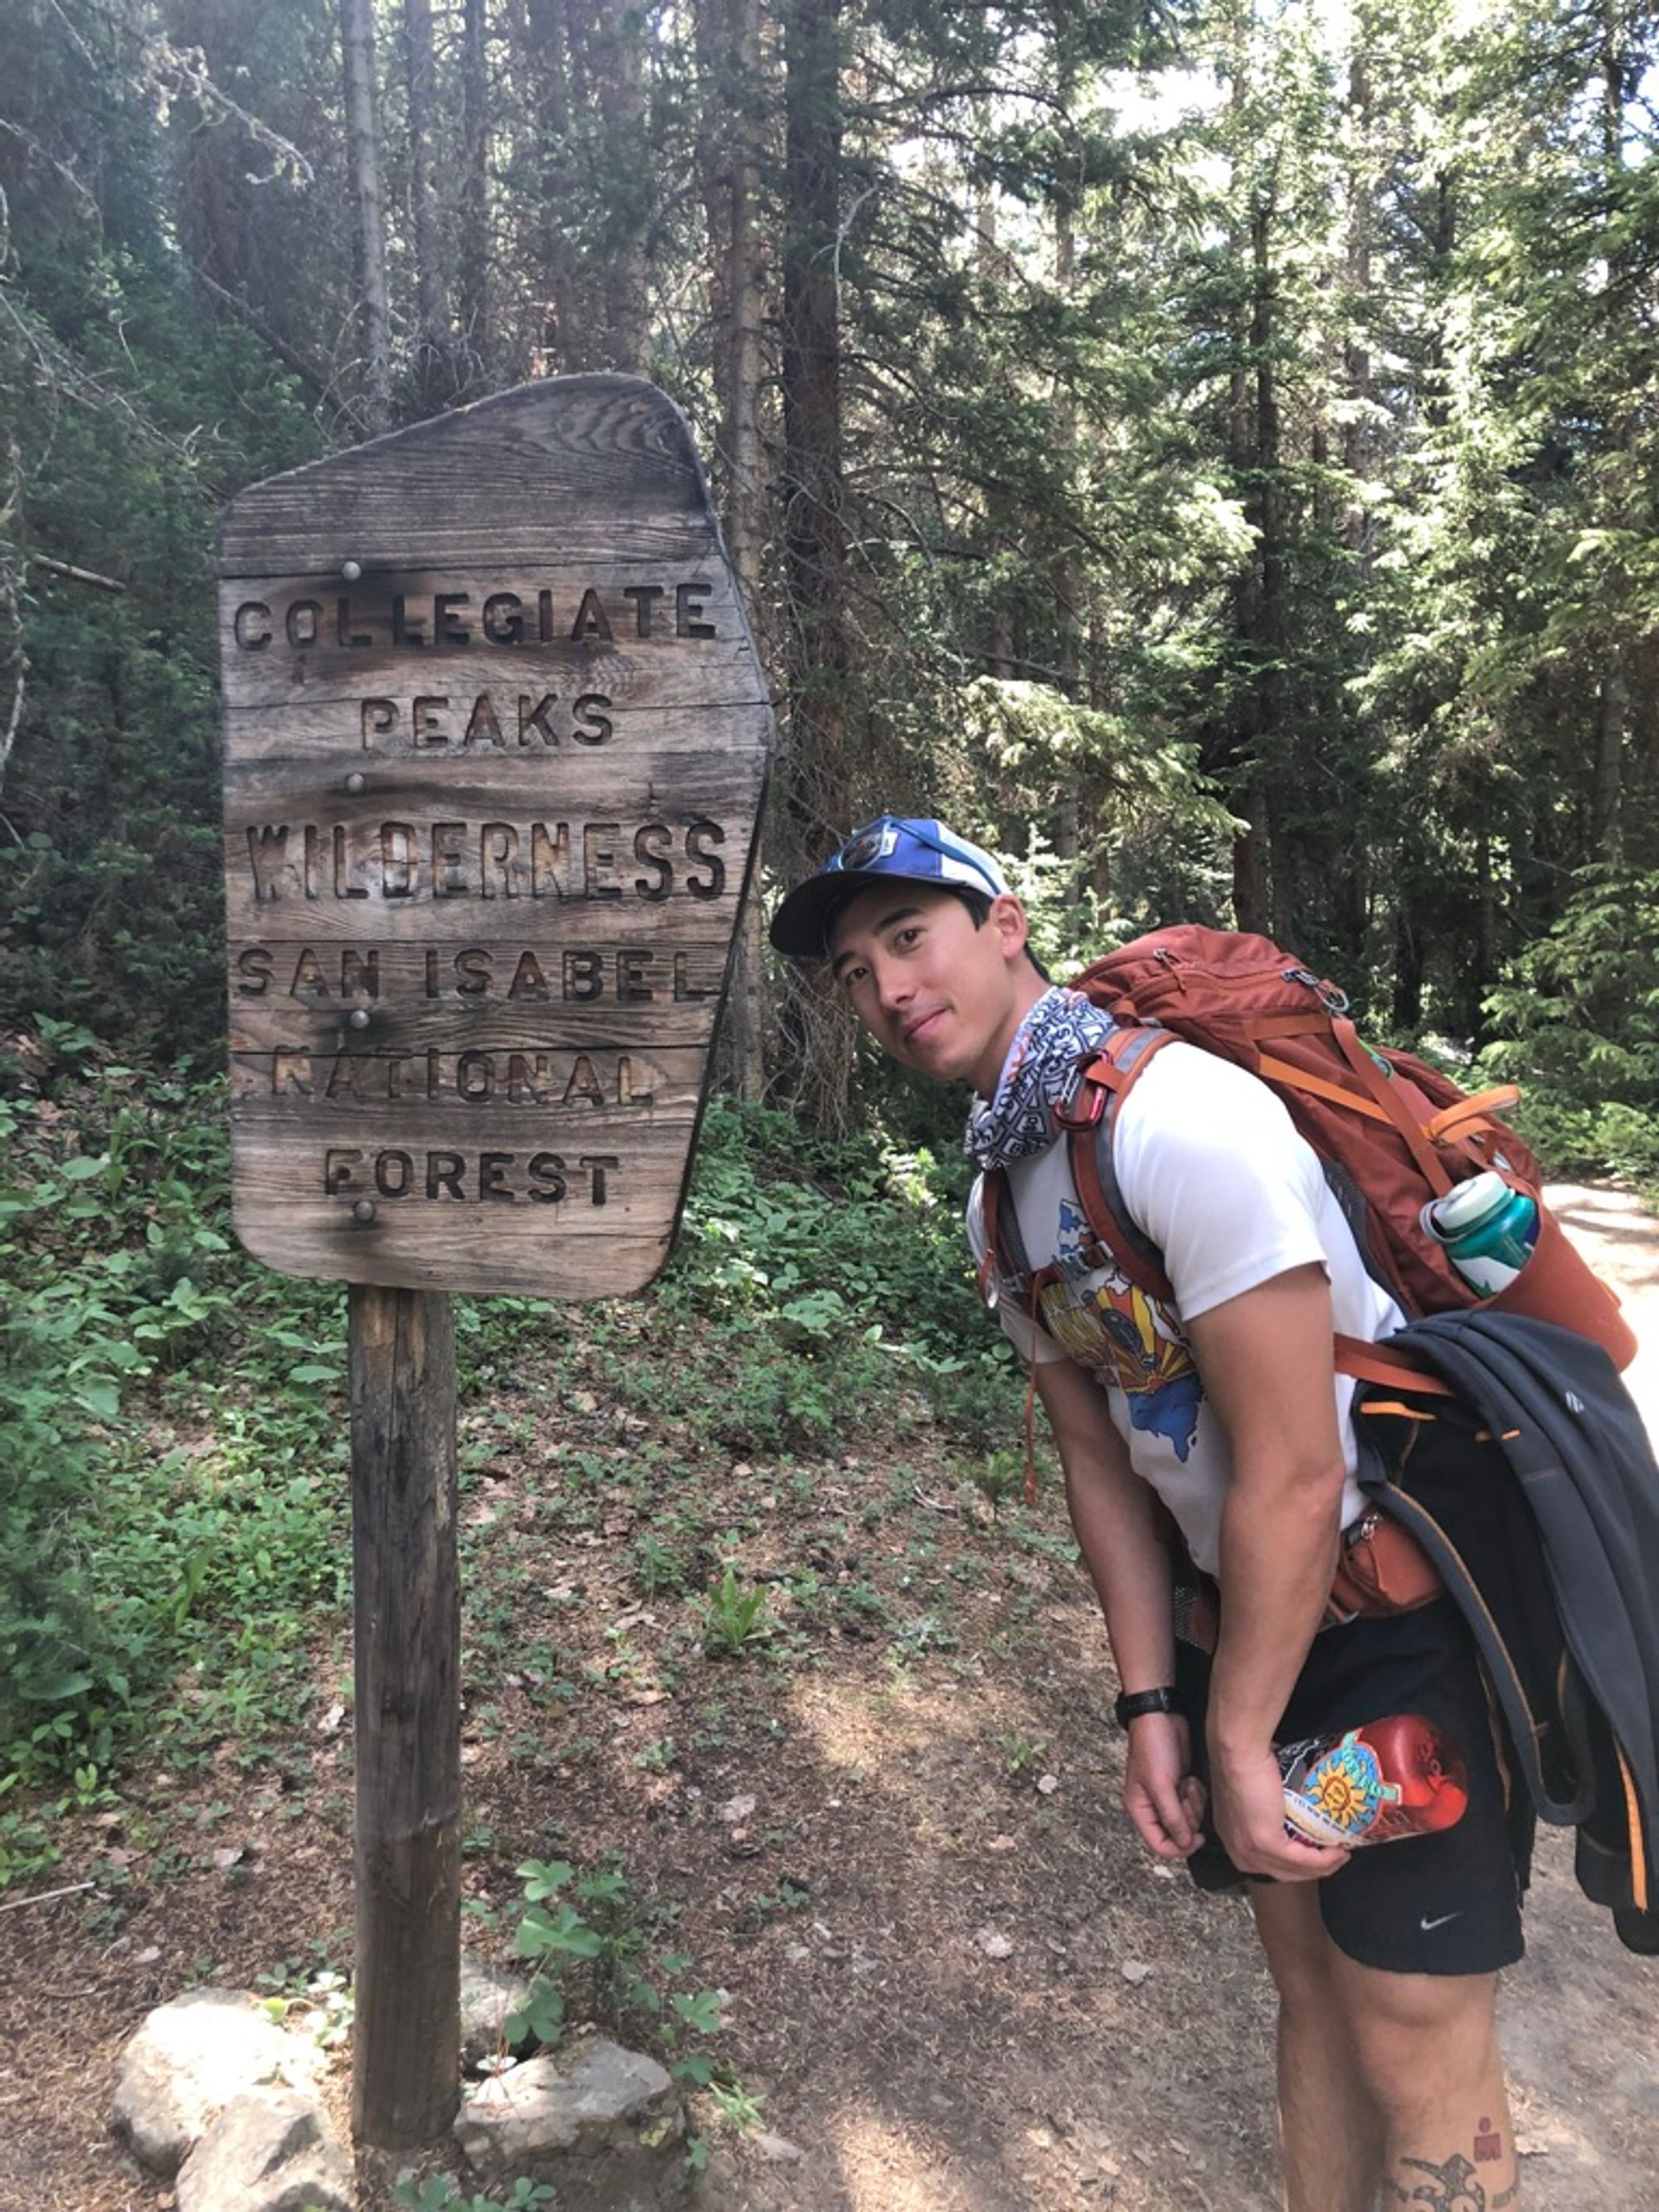 Josh posing with a sign indicating our entry to the Collegiate Peaks Wilderness